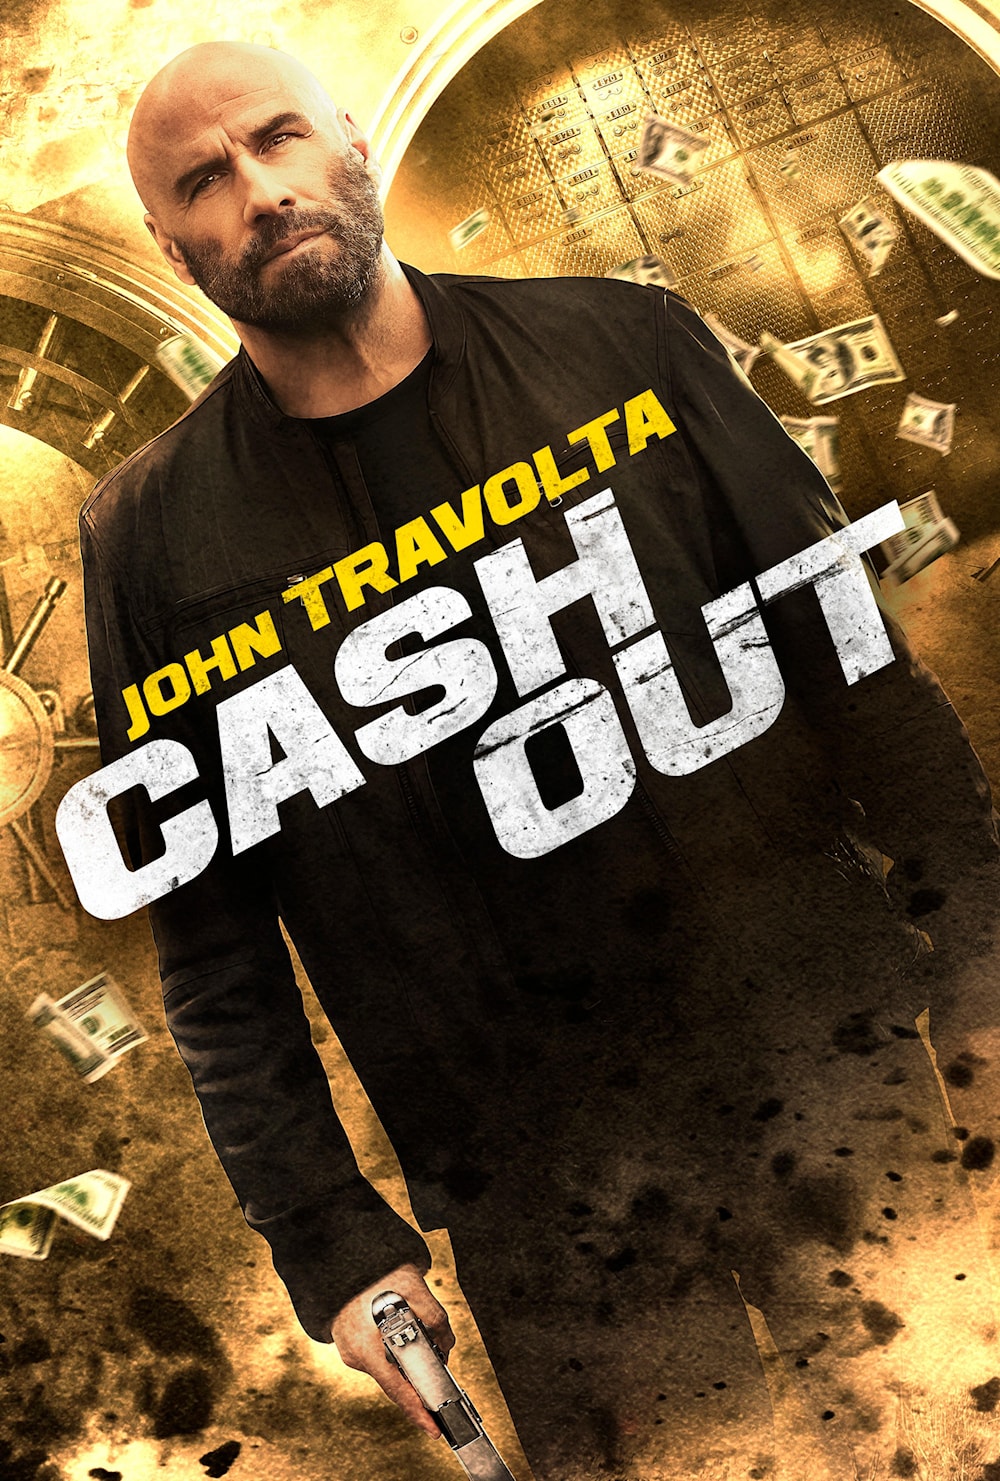 Cash out: الملصق